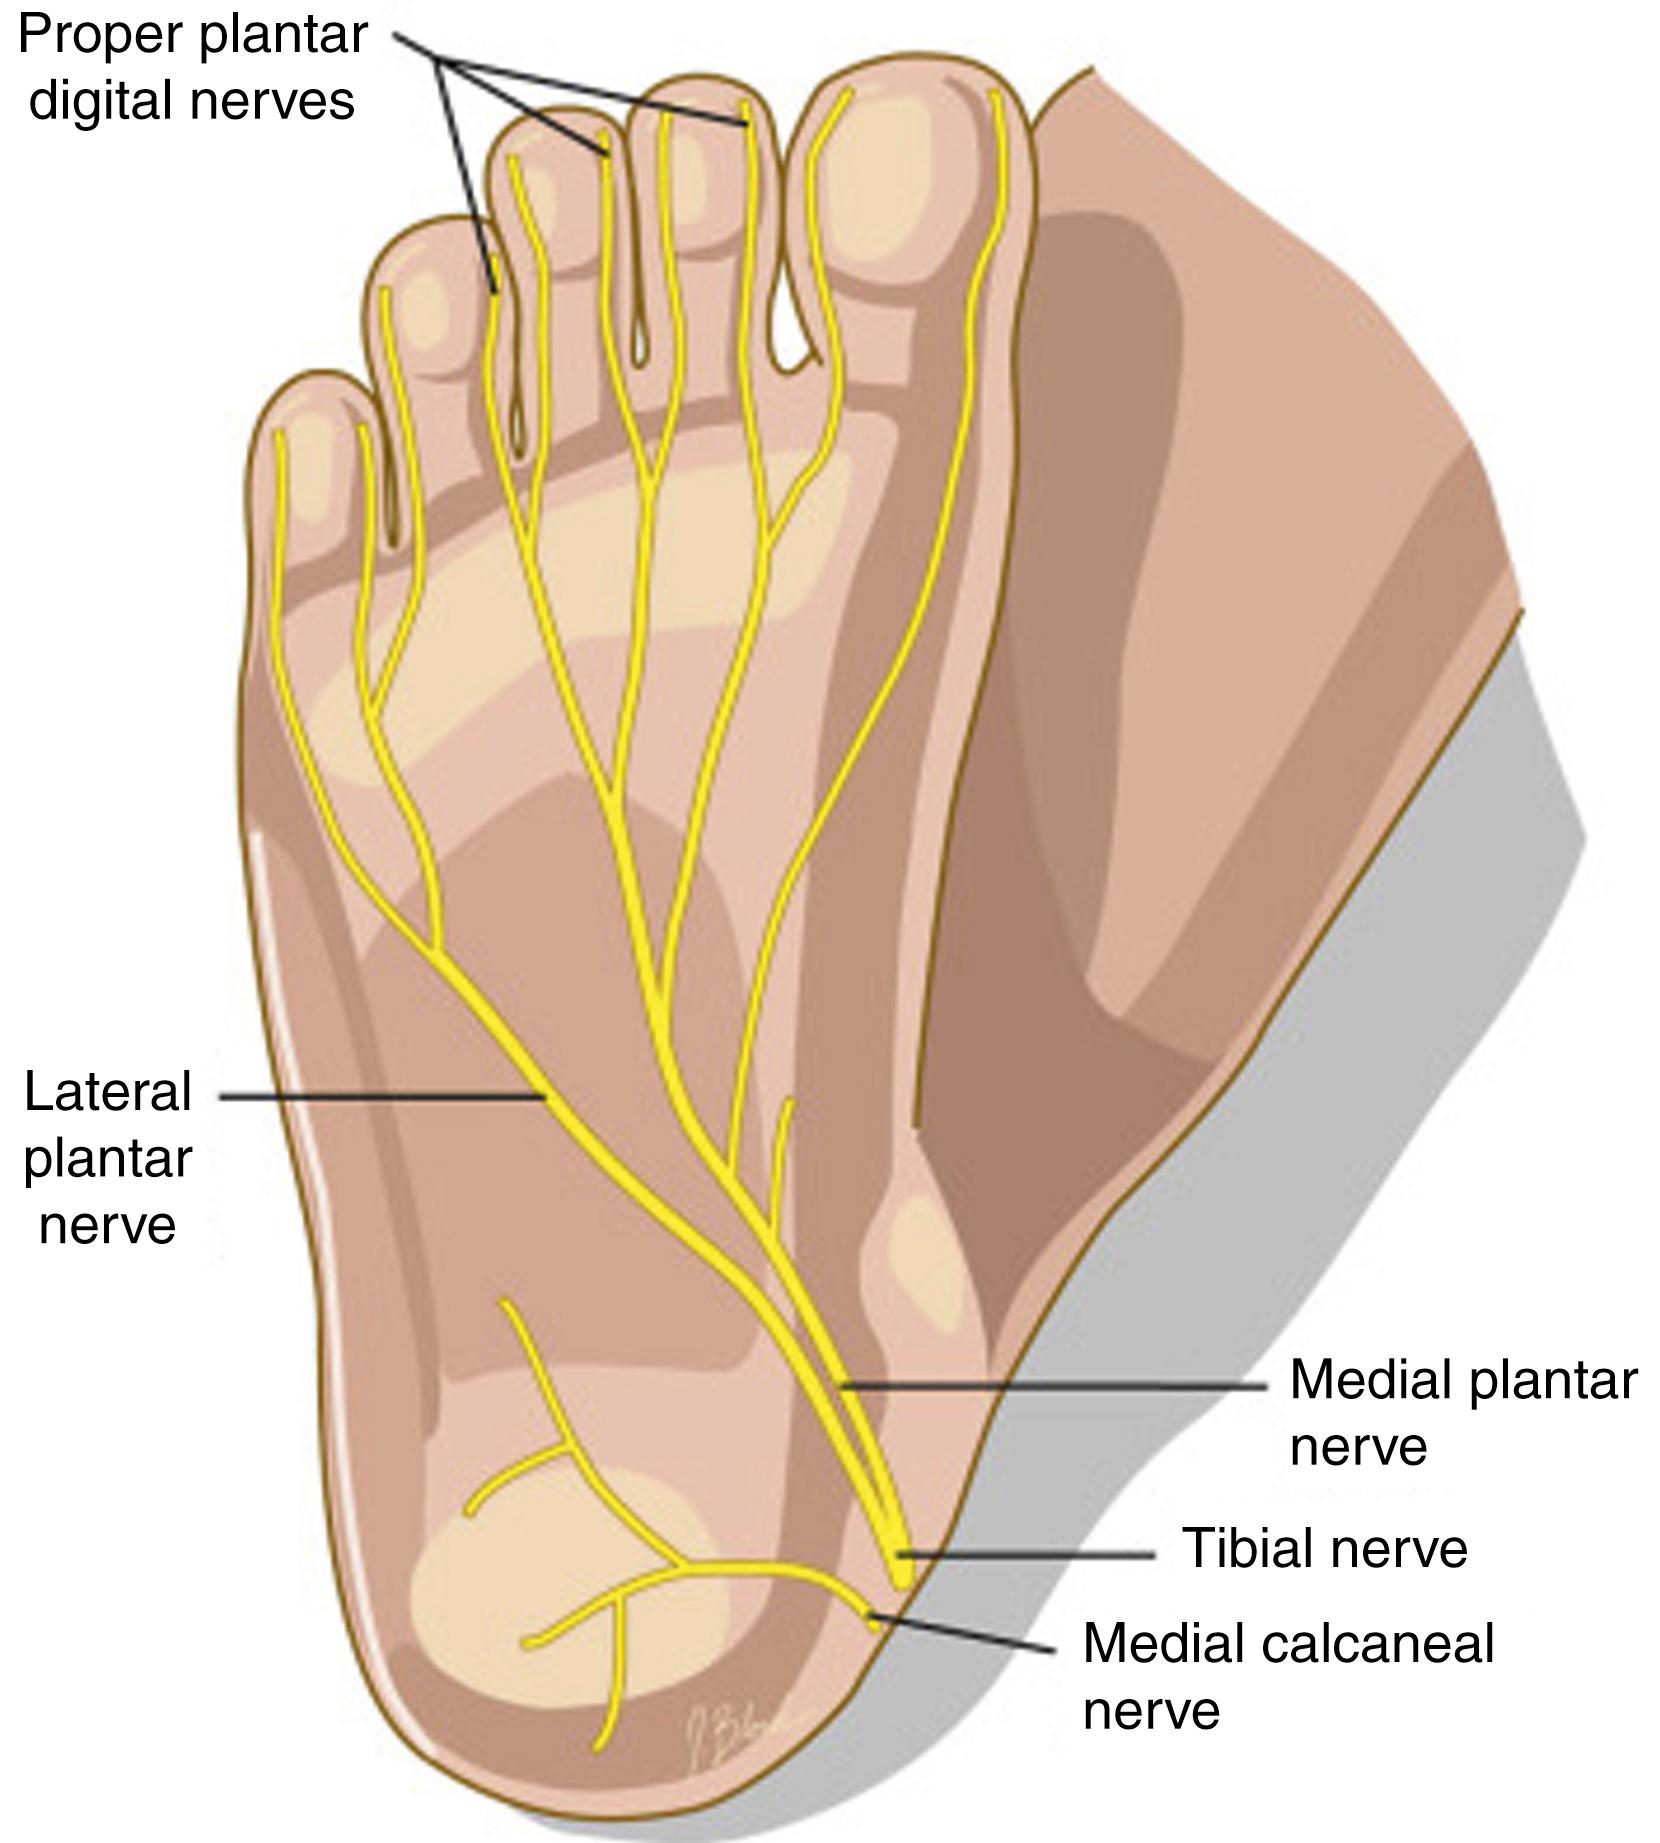 FIG. 197.5, The planar digital nerves, which are derived from the posterior tibial nerve, provide sensory innervation to the major portion of the planter surface.